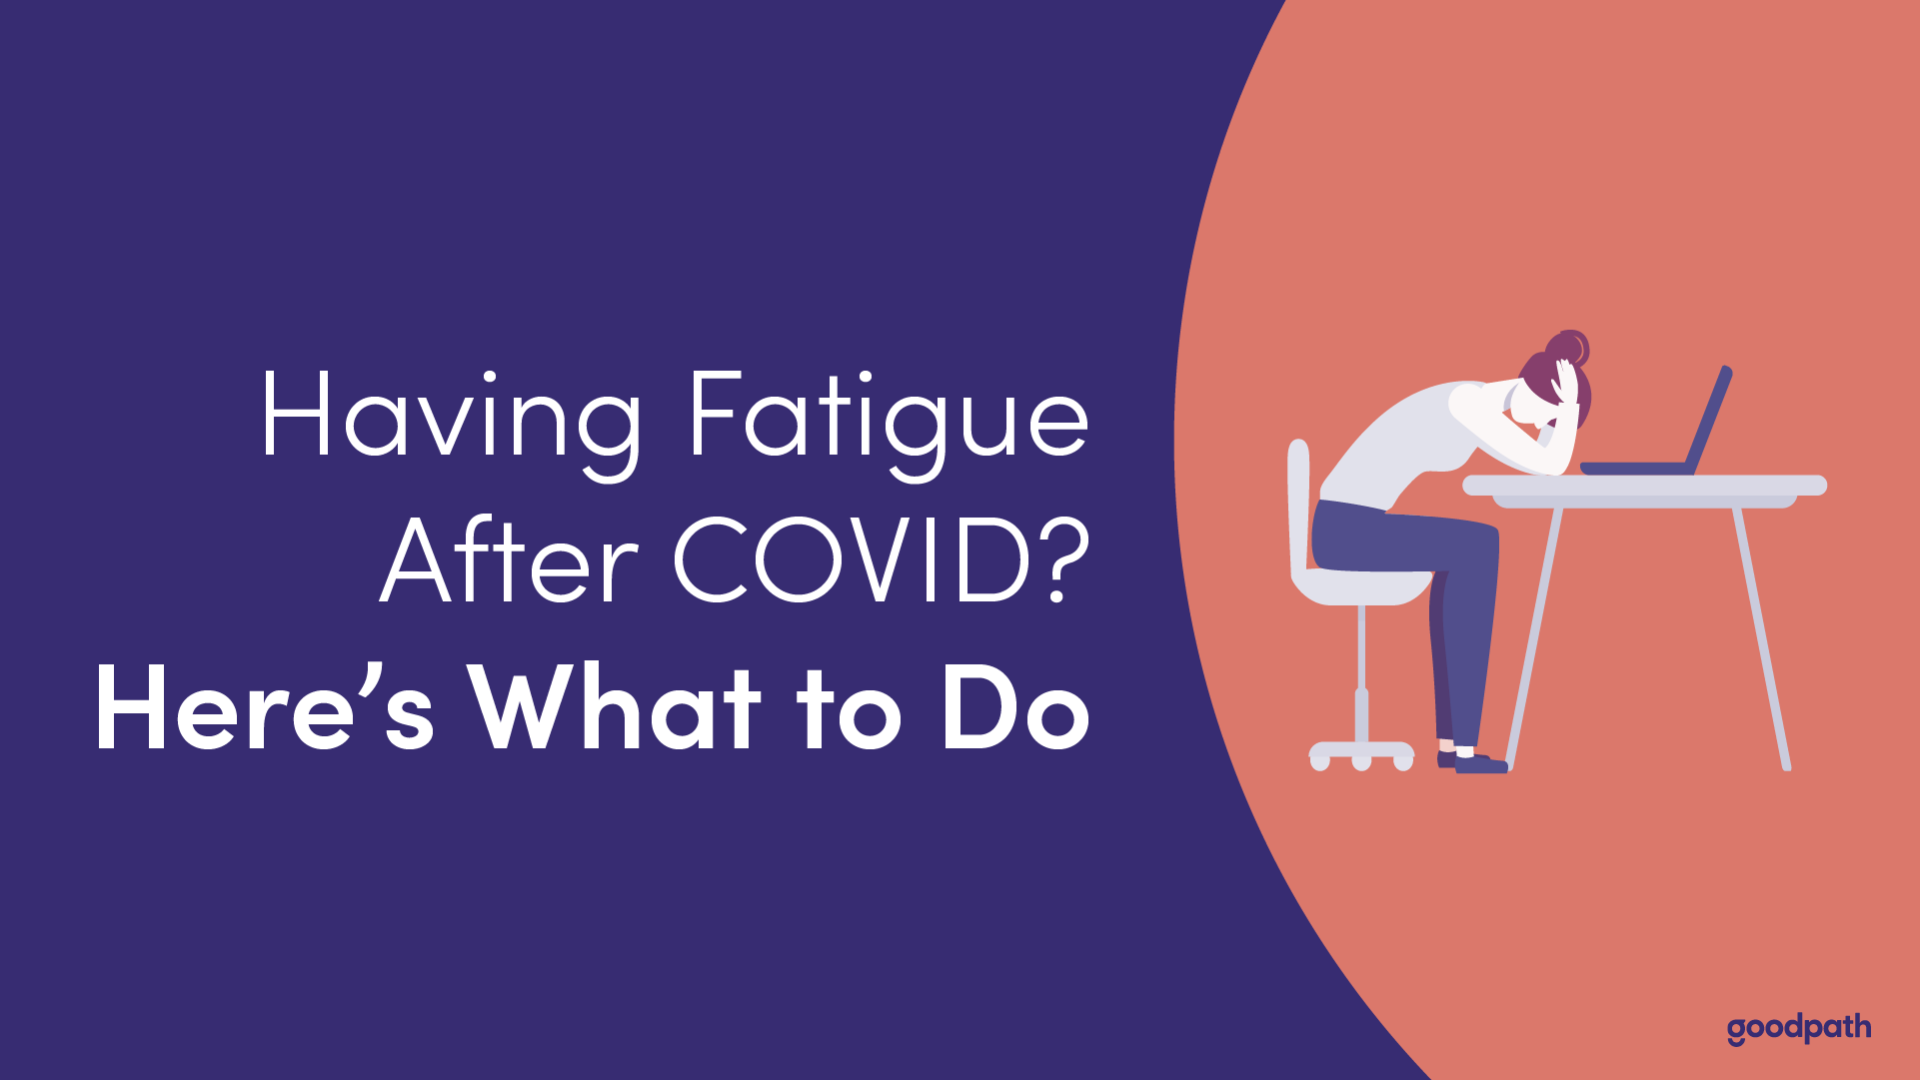 Having Fatigue After COVID? Here’s What to Do.